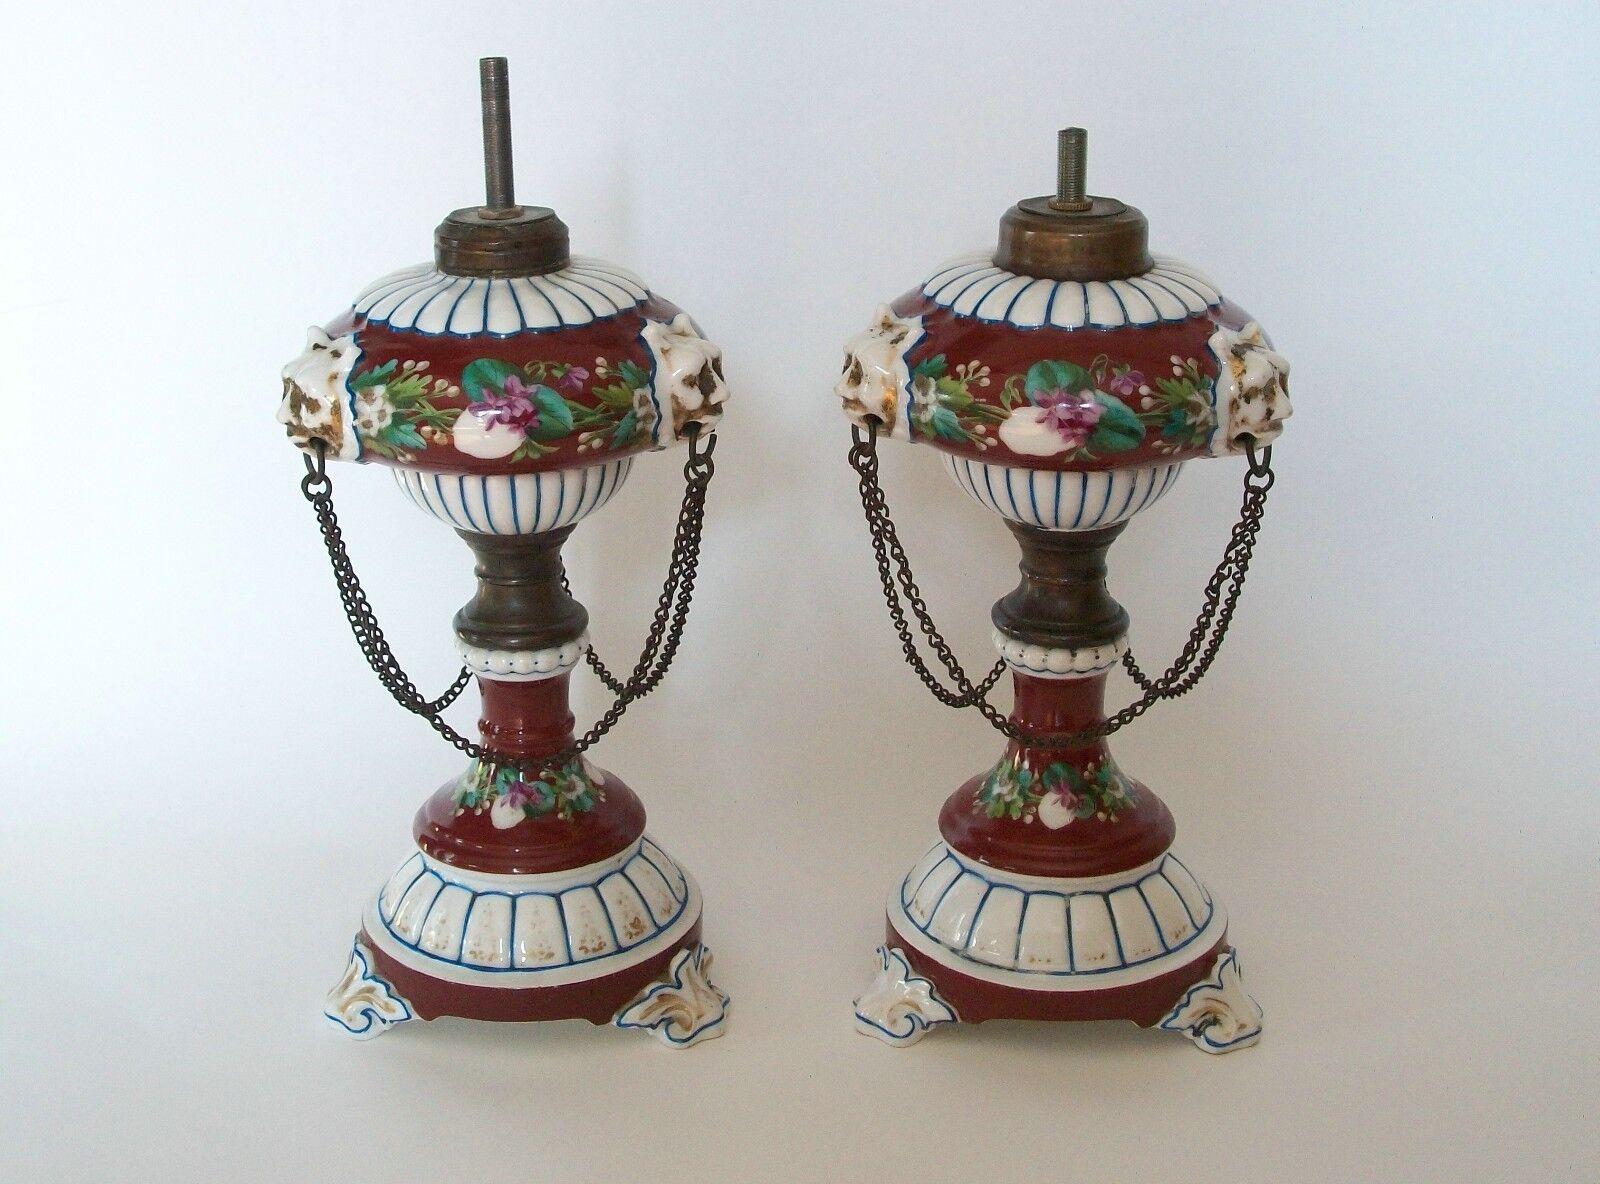 Hand-Painted Victorian Hand Painted Ceramic Oil Lamps with Chain Swags & Lion Masks, C.1850 For Sale